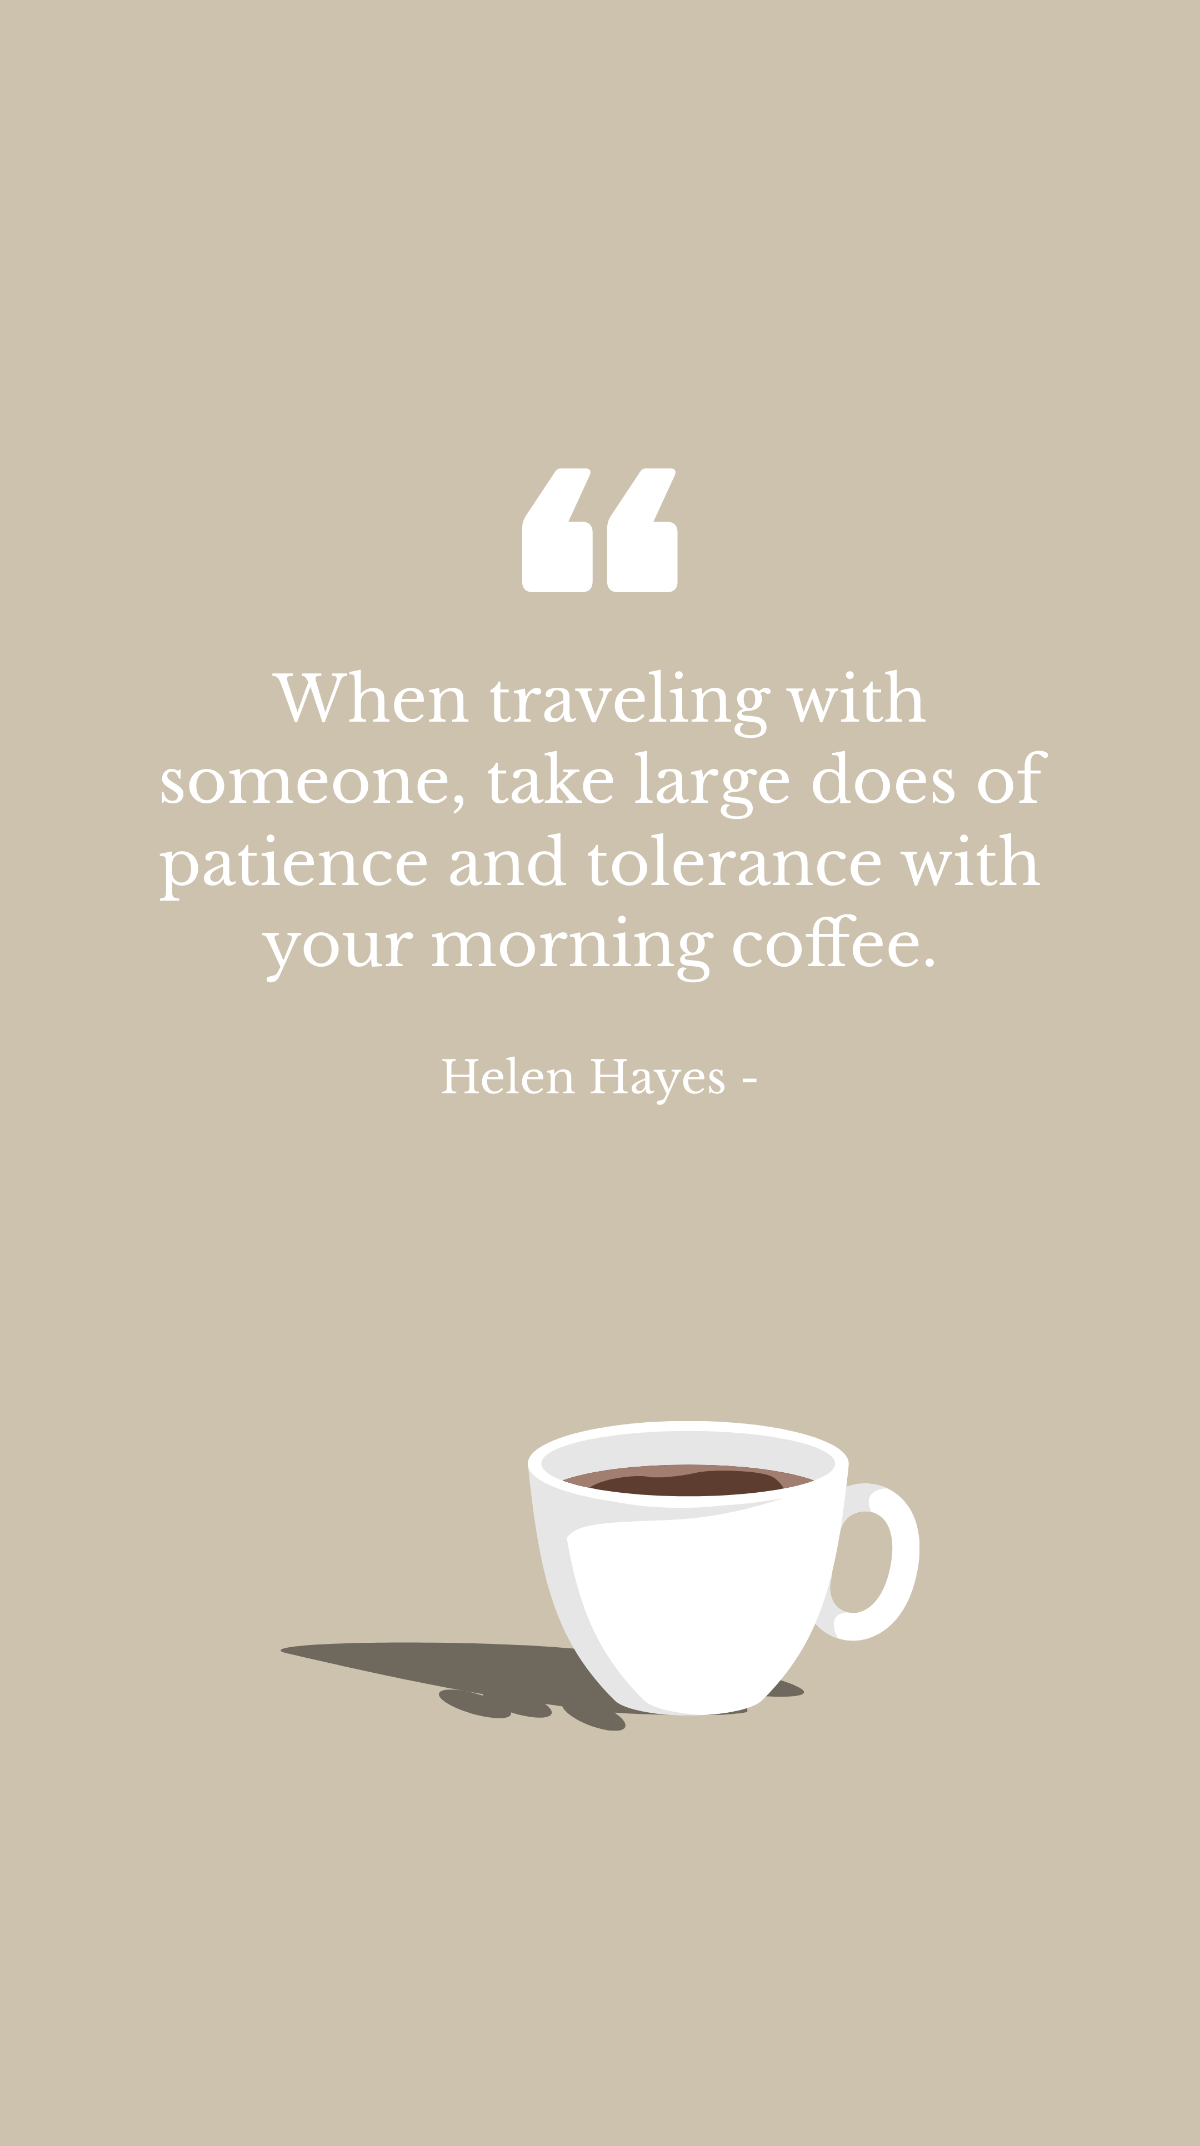 Helen Hayes - When traveling with someone, take large does of patience and tolerance with your morning coffee.